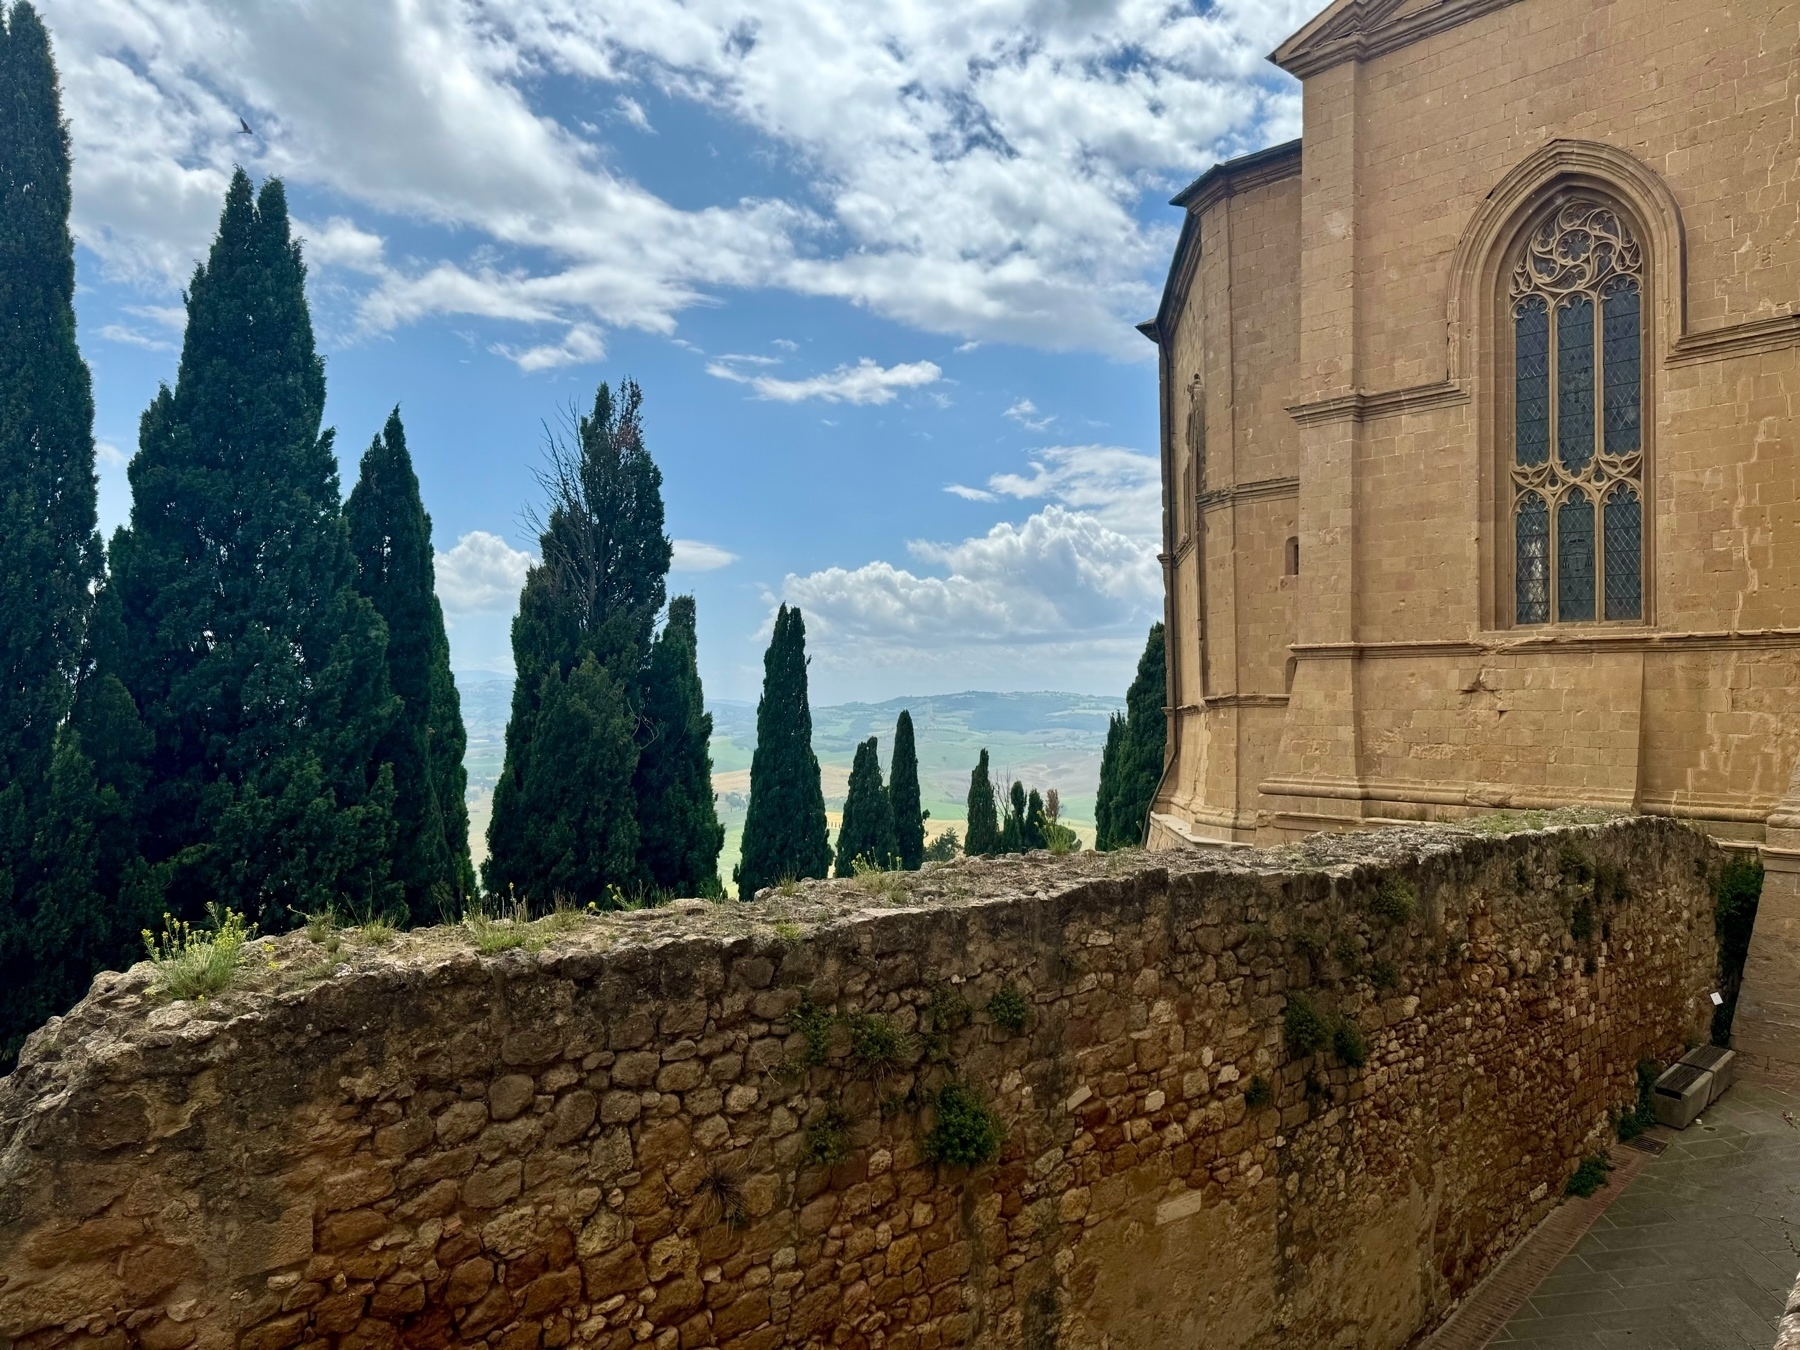 A scenic view featuring a stone wall leading to a large historic building with Gothic-style windows. Tall cypress trees stand beyond the wall, under a blue sky with scattered clouds. The background includes a distant hilly landscape.